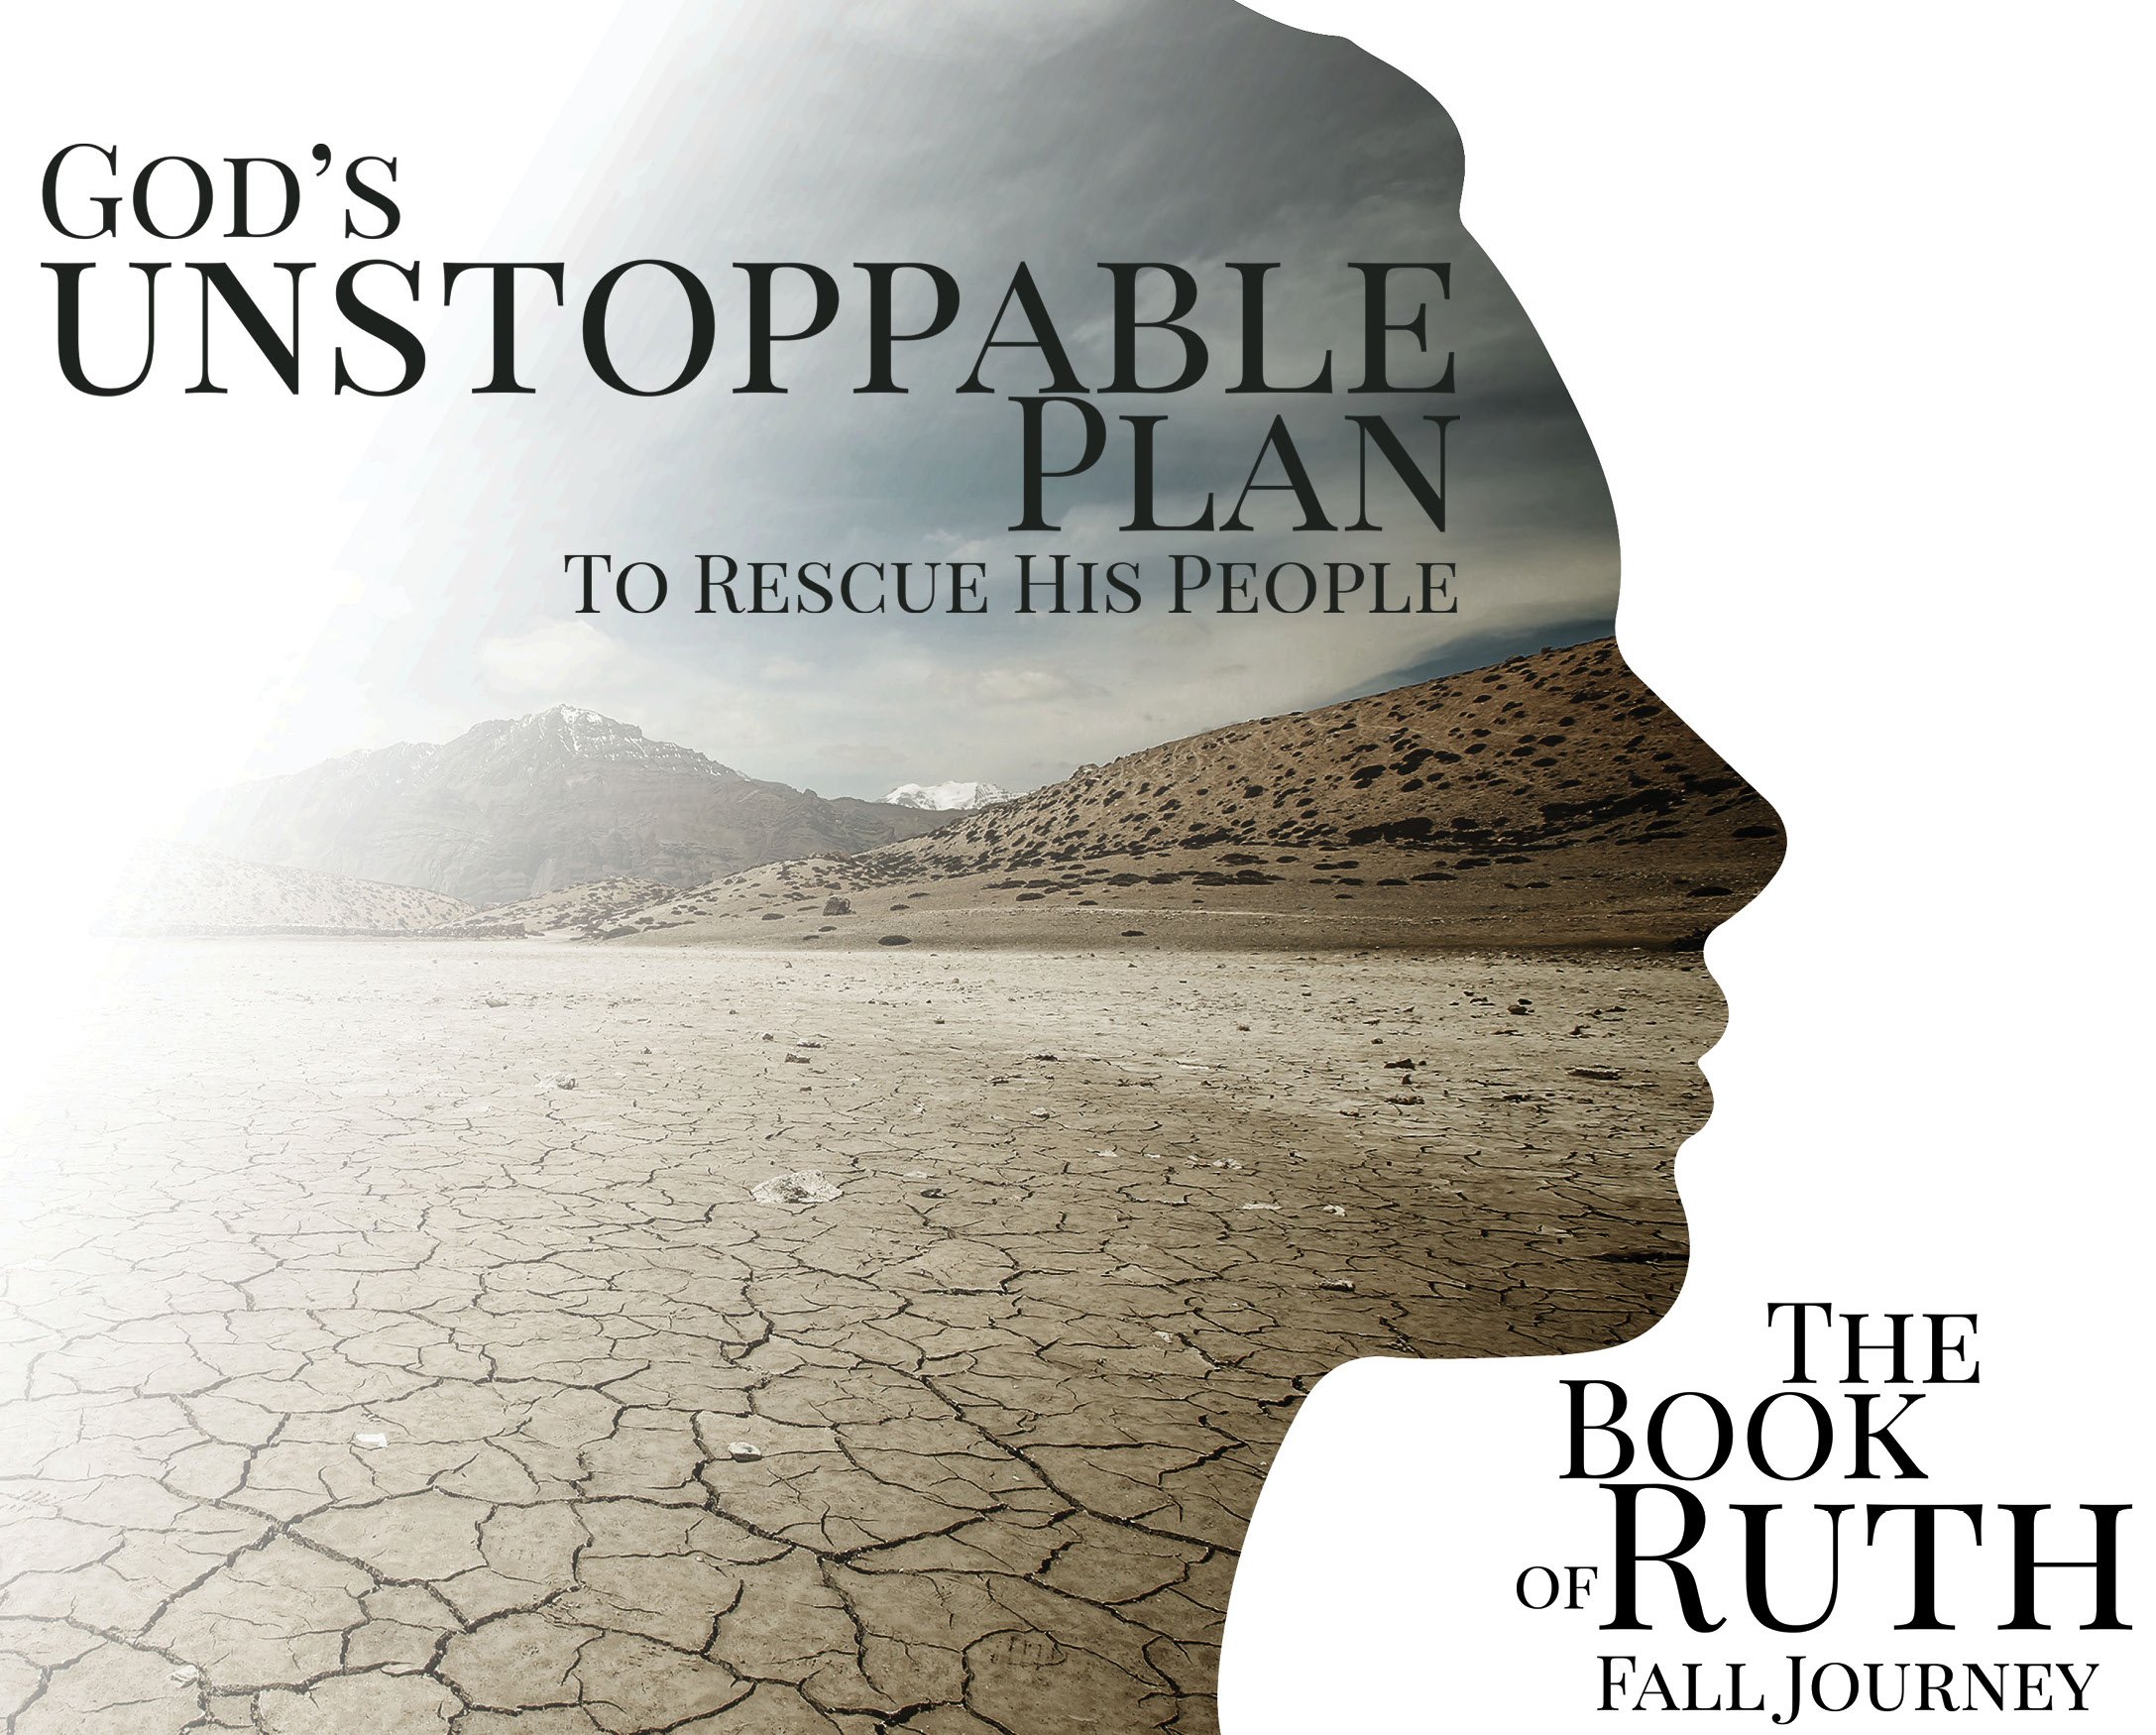 God’s Unstoppable Plan to Rescue His People: Boaz